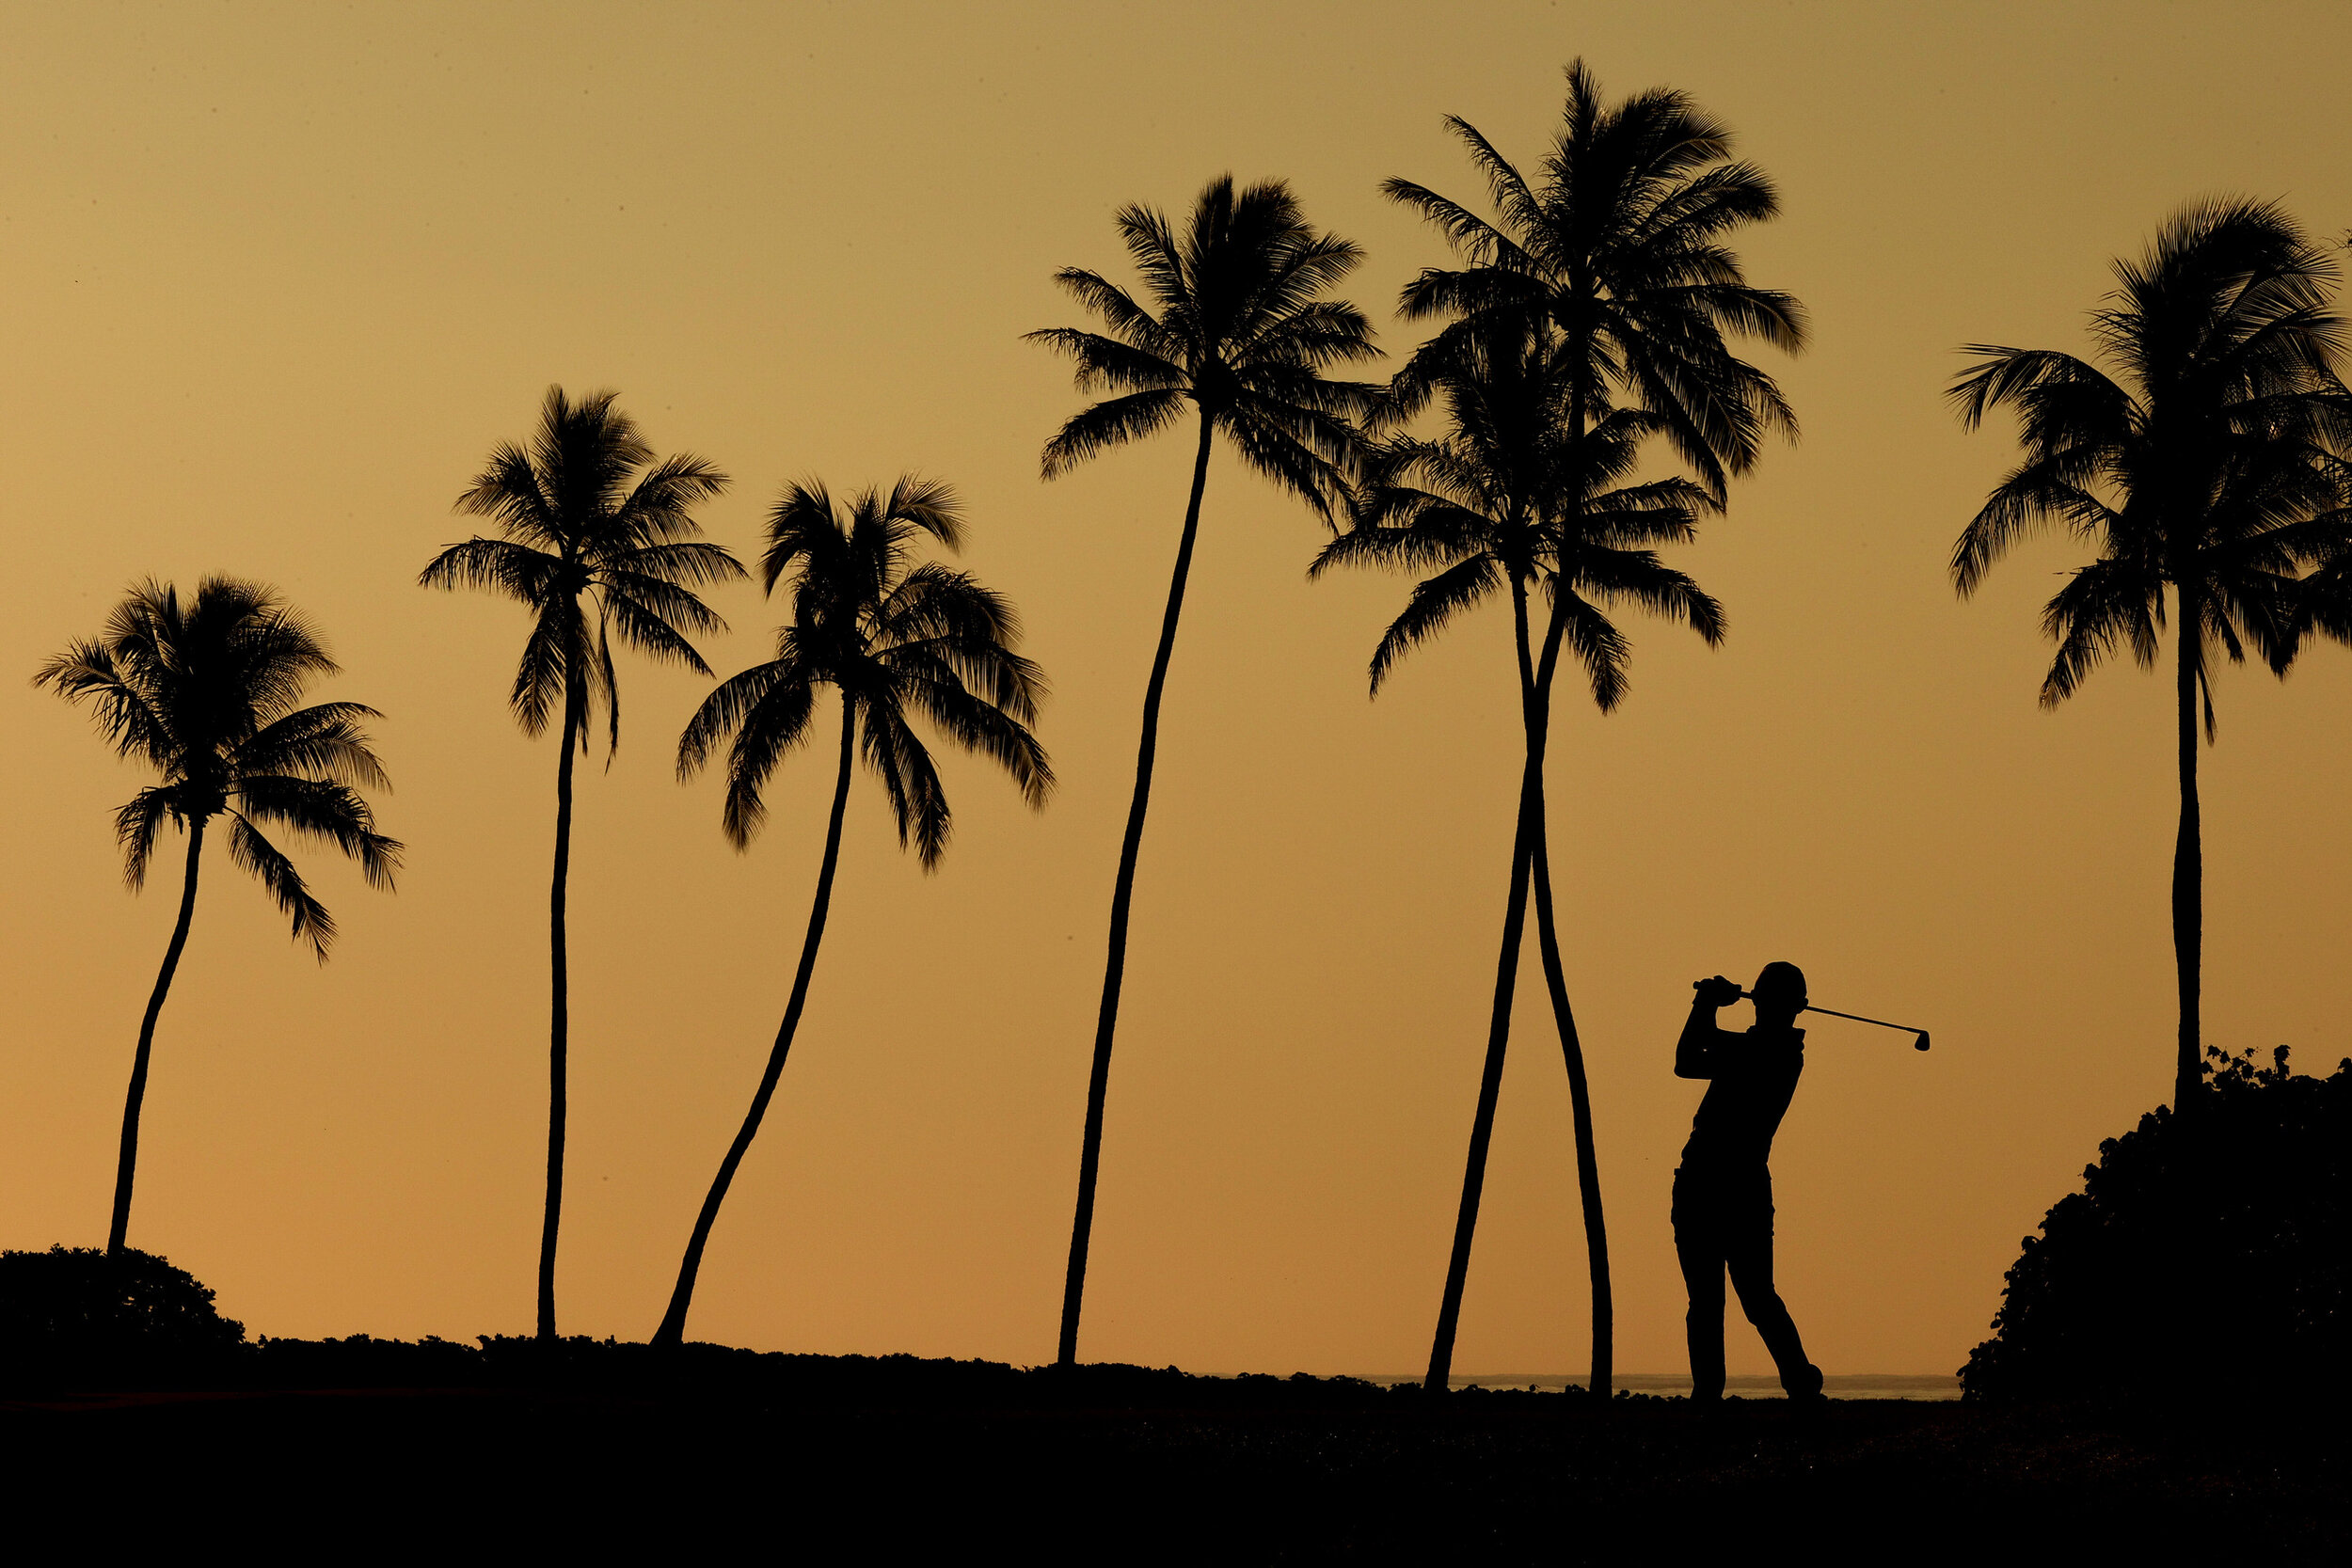  HONOLULU, HAWAII - JANUARY 15: Collin Morikawa of the United States plays his shot from the 11th tee during the second round of the Sony Open in Hawaii at the Waialae Country Club on January 15, 2021 in Honolulu, Hawaii. (Photo by Gregory Shamus/Get